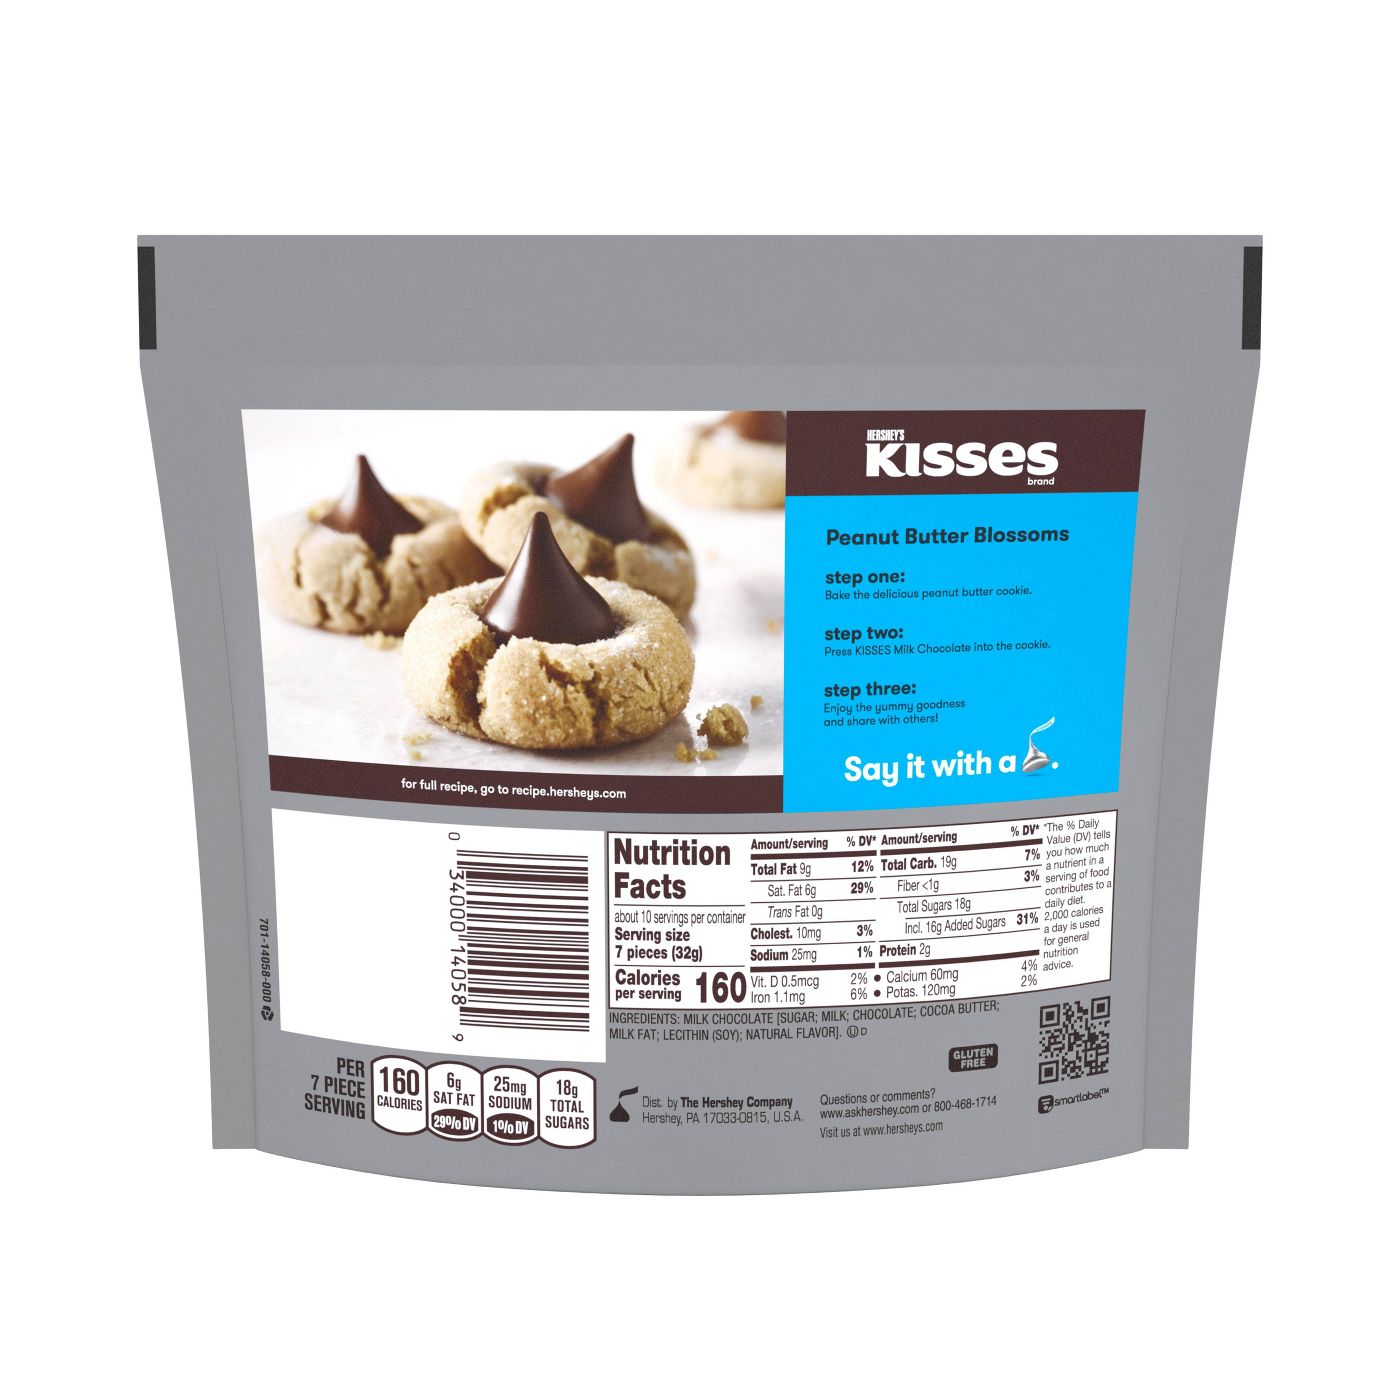 Hershey’s, Kisses Candy Family Pack, Milk Chocolate, 17.9oz